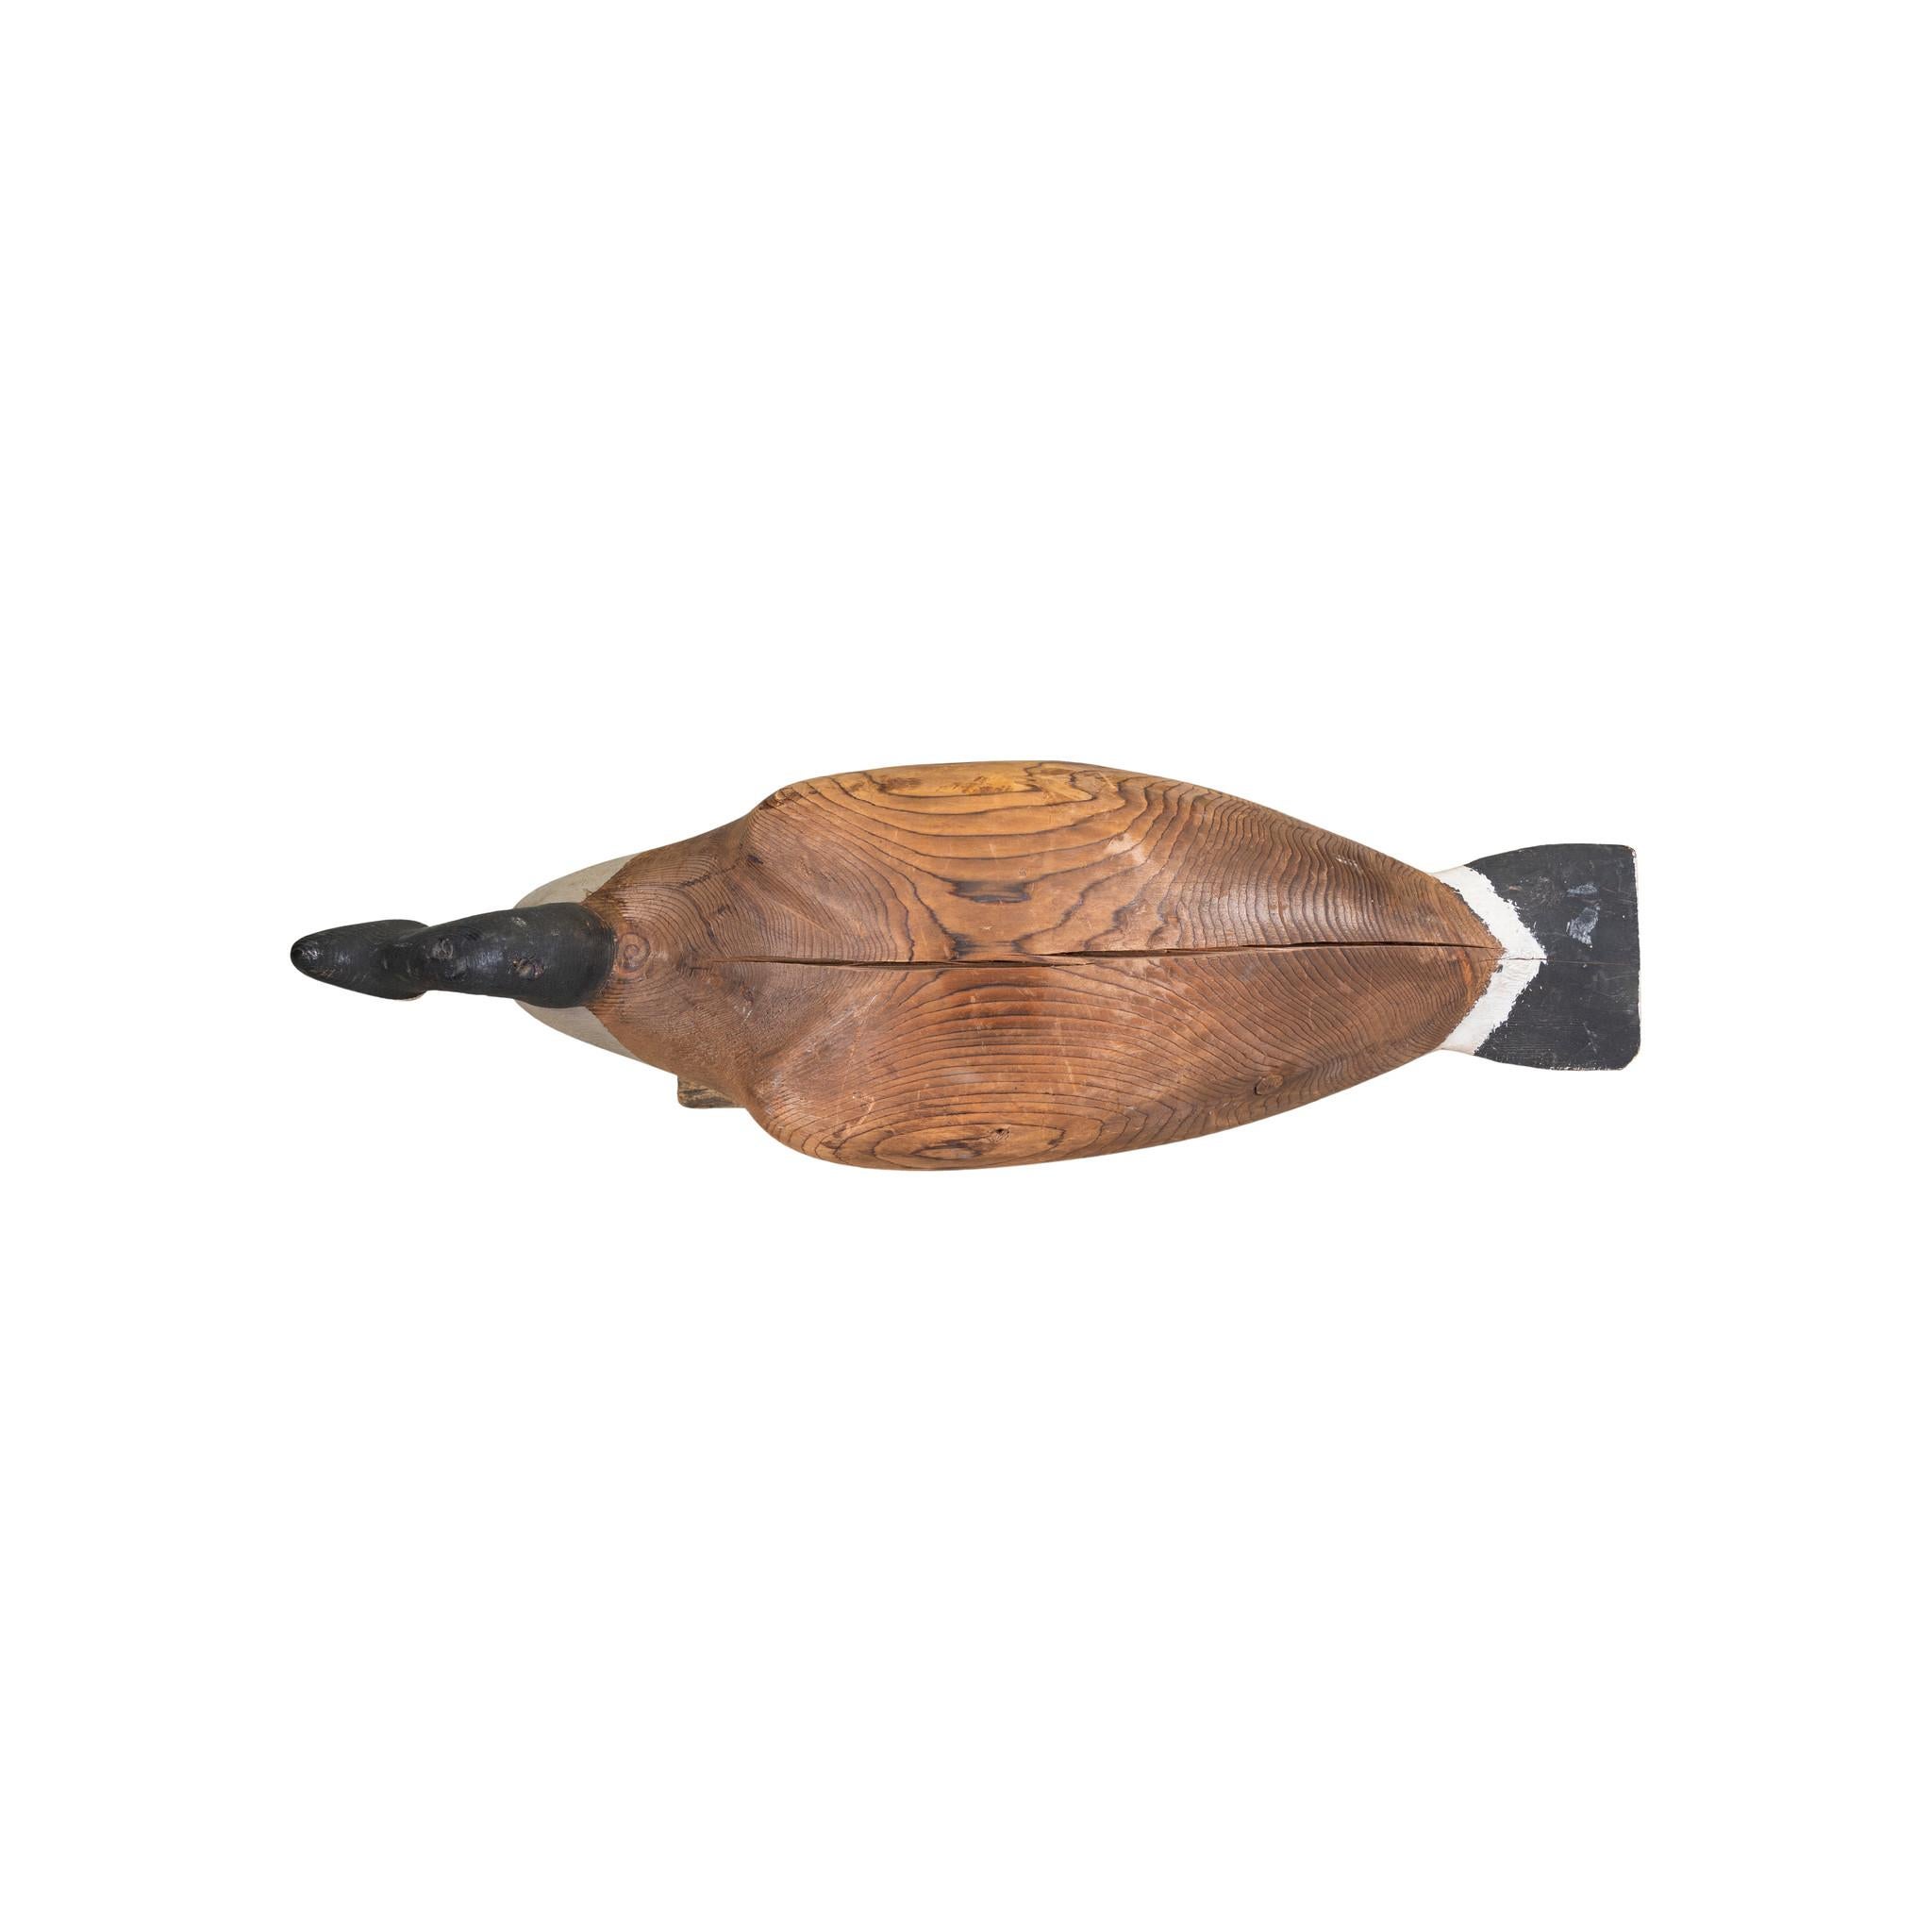 Carved and painted Canadian goose decoy. Well painted head and under body. Back unpainted. Hunter used. Natural wood grain looks like wings and feathers.

Period: Early 20th century

Origin: Eastern United States

Size: 22 1/2